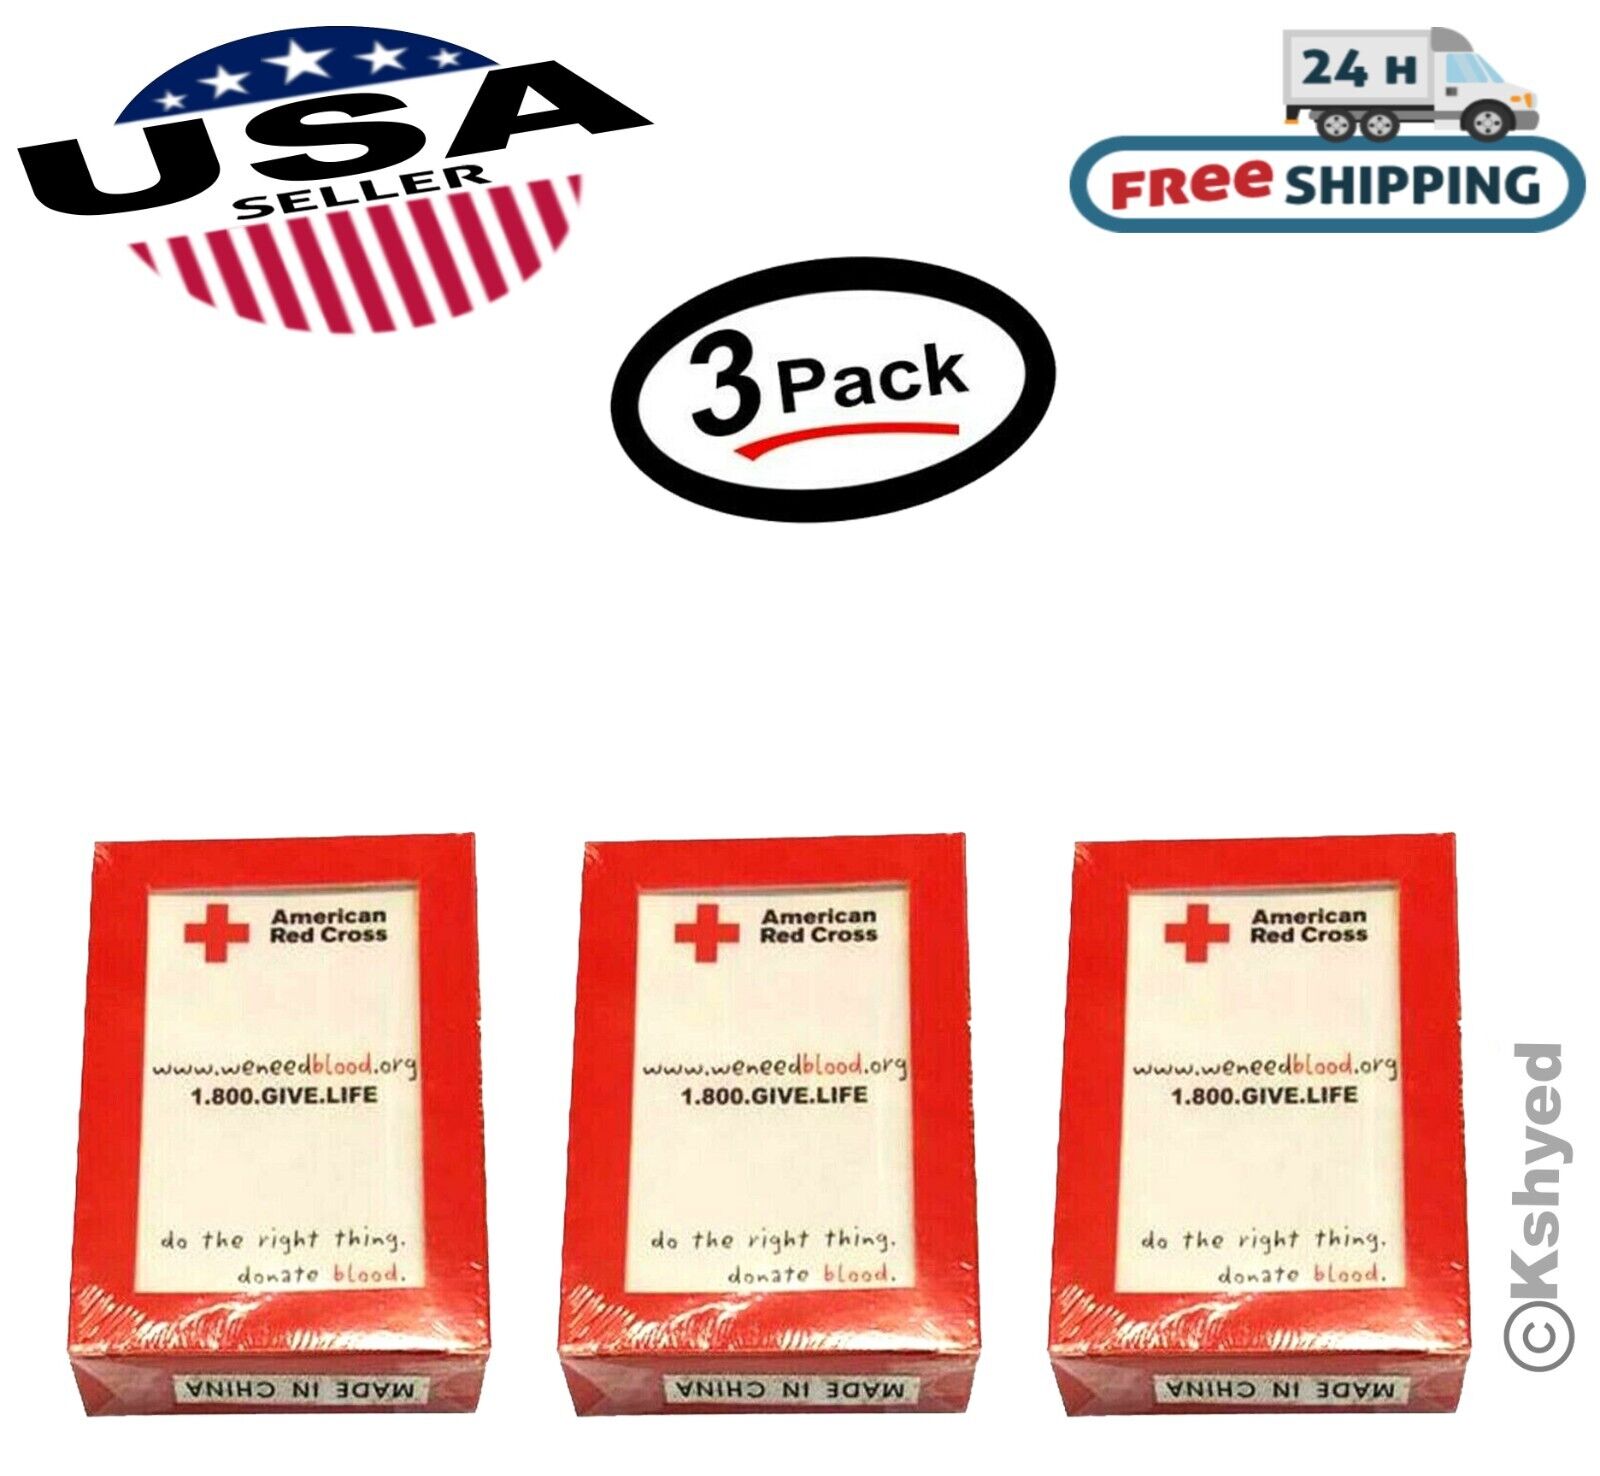 (3 Pack) American Red Cross Vintage Playing Cards excellent condition Rare - New